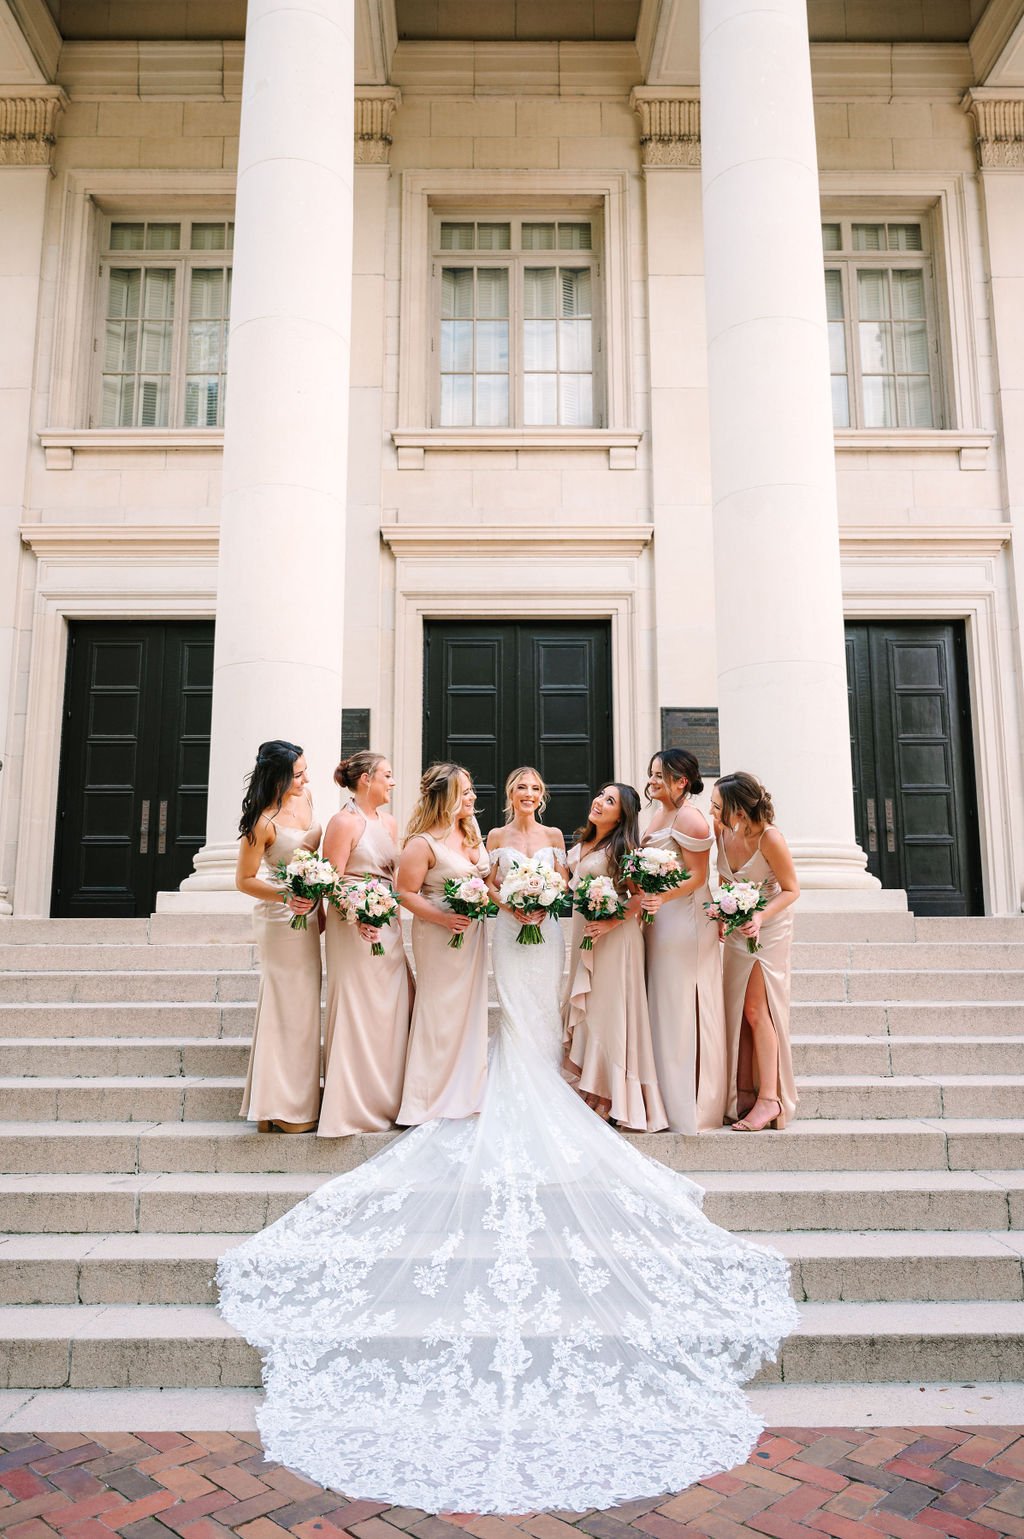 hayley-and-chris-romantic-rooftop-wedding-at-the-perry-lane-in-savannah-ga-featuring-organic-lush-wedding-florals-designed-by-ivory-and-beau-12.jpg